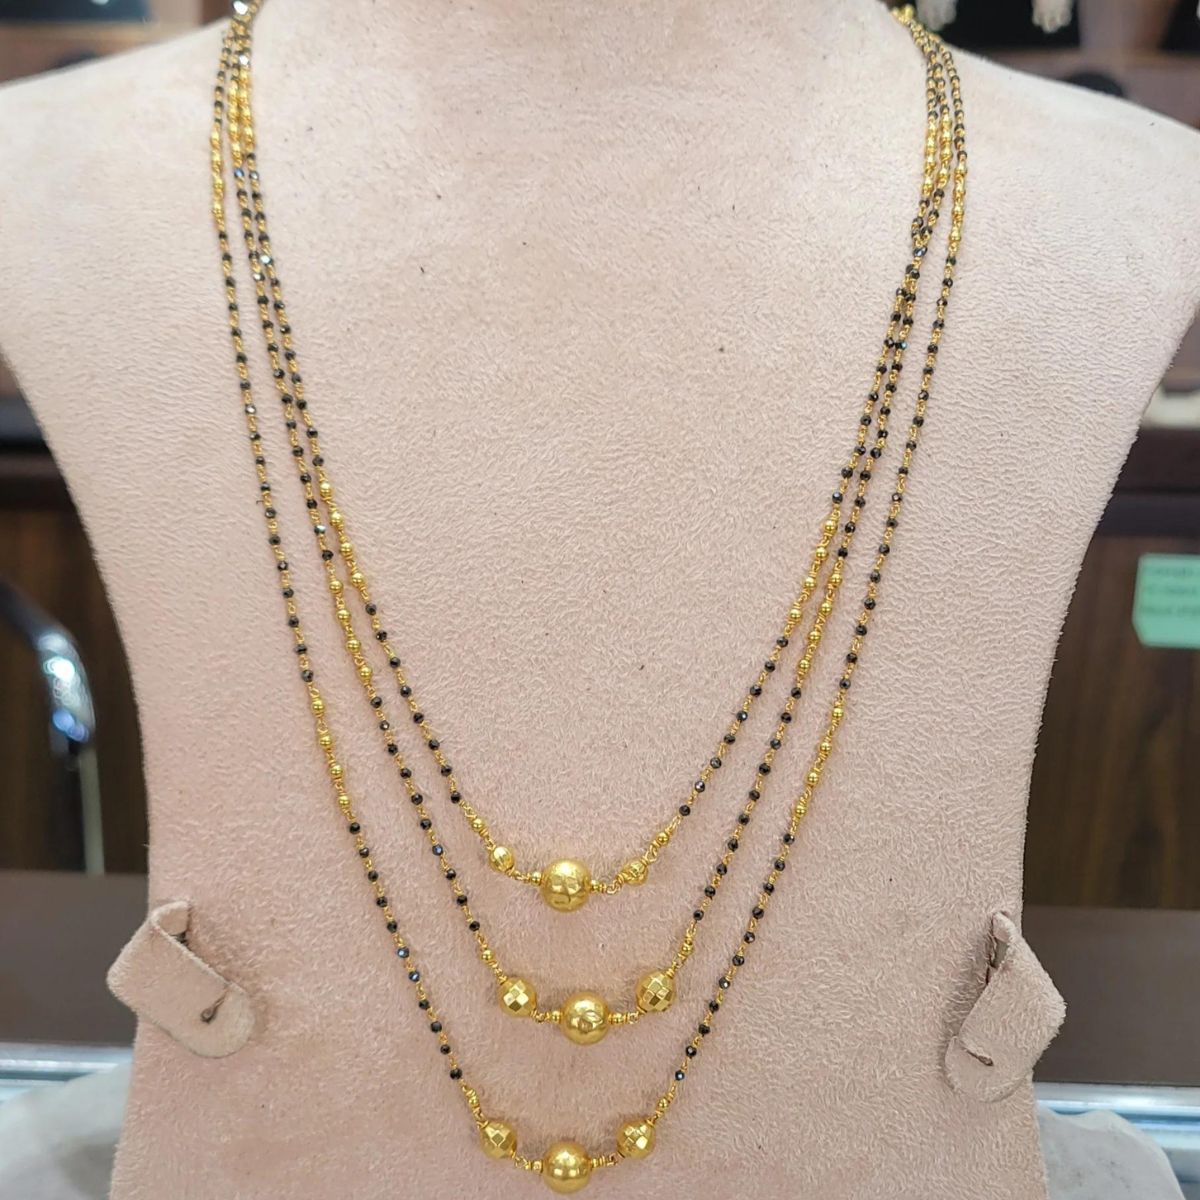 Temple Gold Necklace with Diamond Beads.